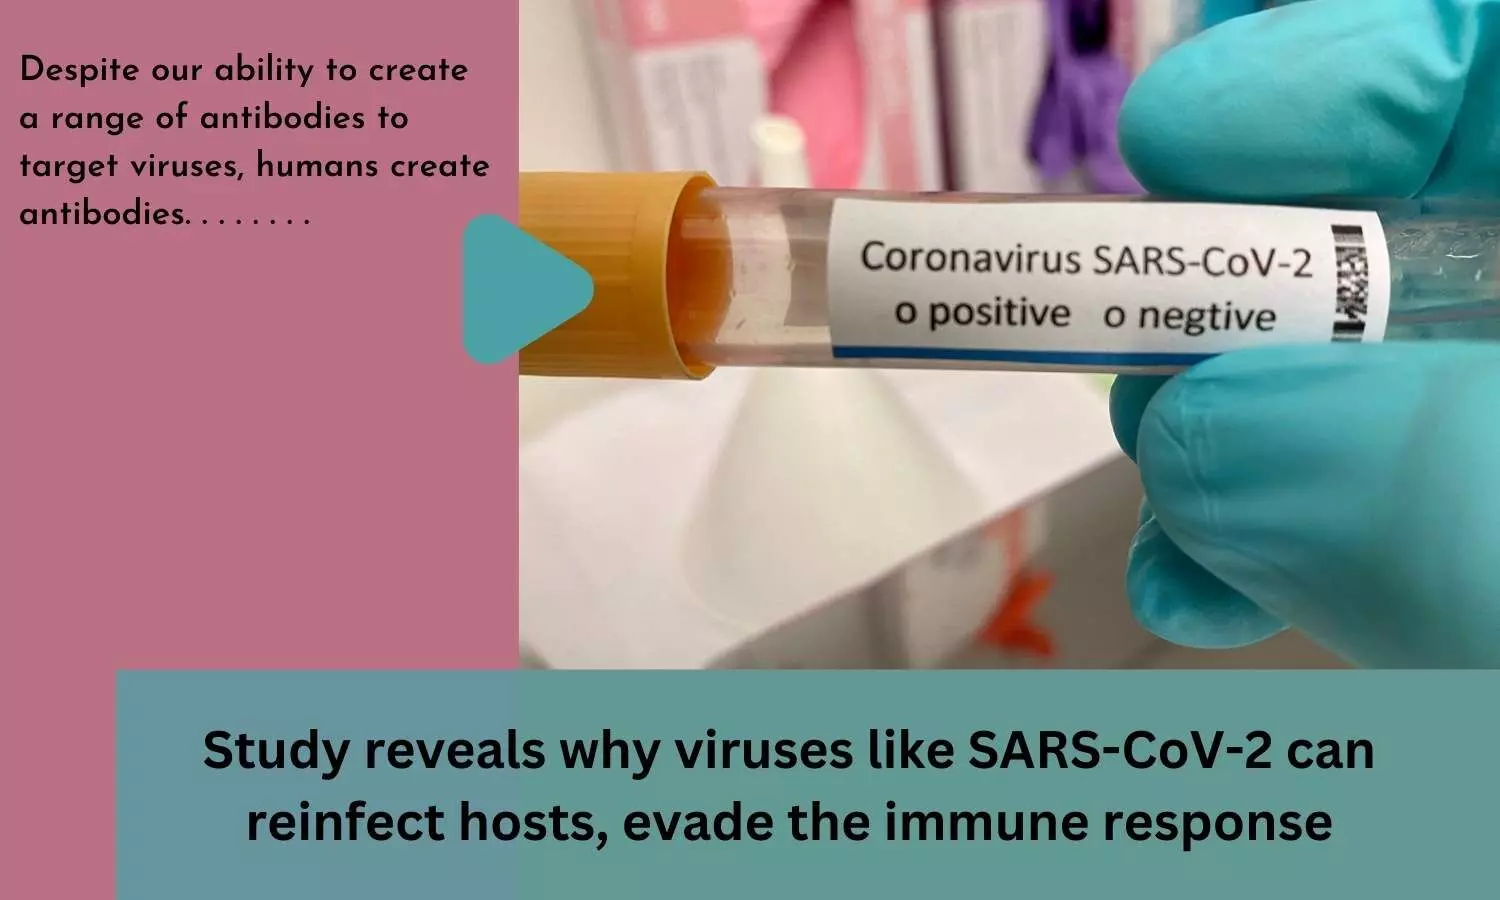 Study reveals why viruses like SARS-CoV-2 can reinfect hosts, evade the immune response